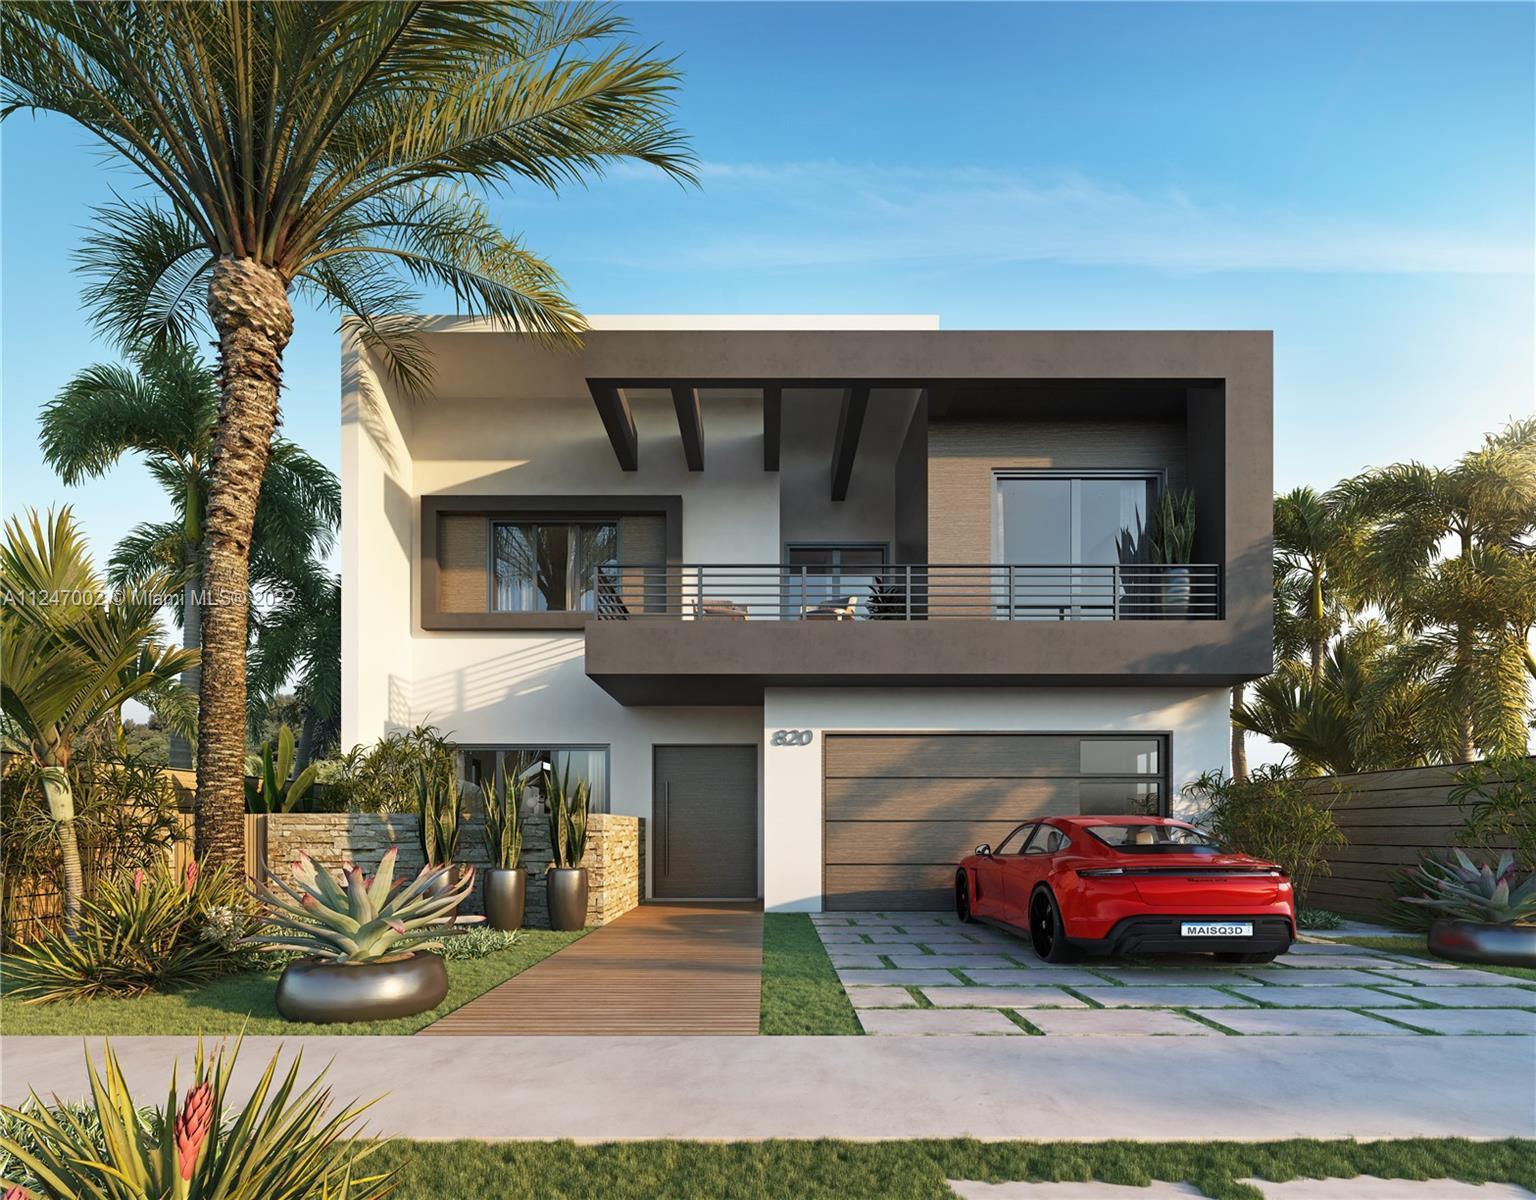 This stunning luxury New Construction home is located in the highly sought-after neighborhood of Rio